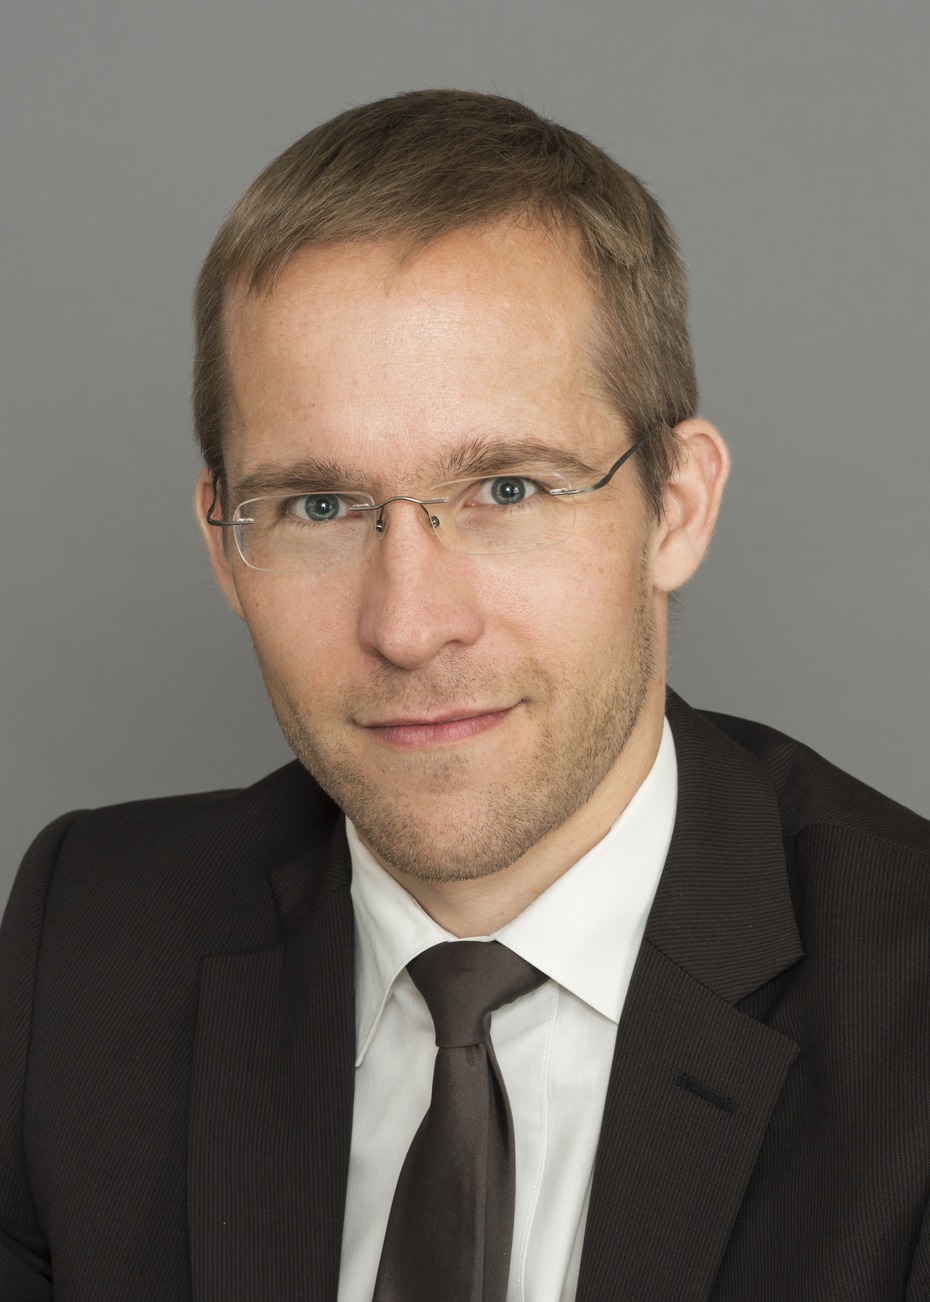 Dr. Martin Kipping, Advisor to the Executive Director for Germany, The World Bank Group, Email: martin.kipping@gmx.net, LinkedIn: https://www.linkedin.com/profile/view?id=230089835
Quelle: Dr. Martin Kipping